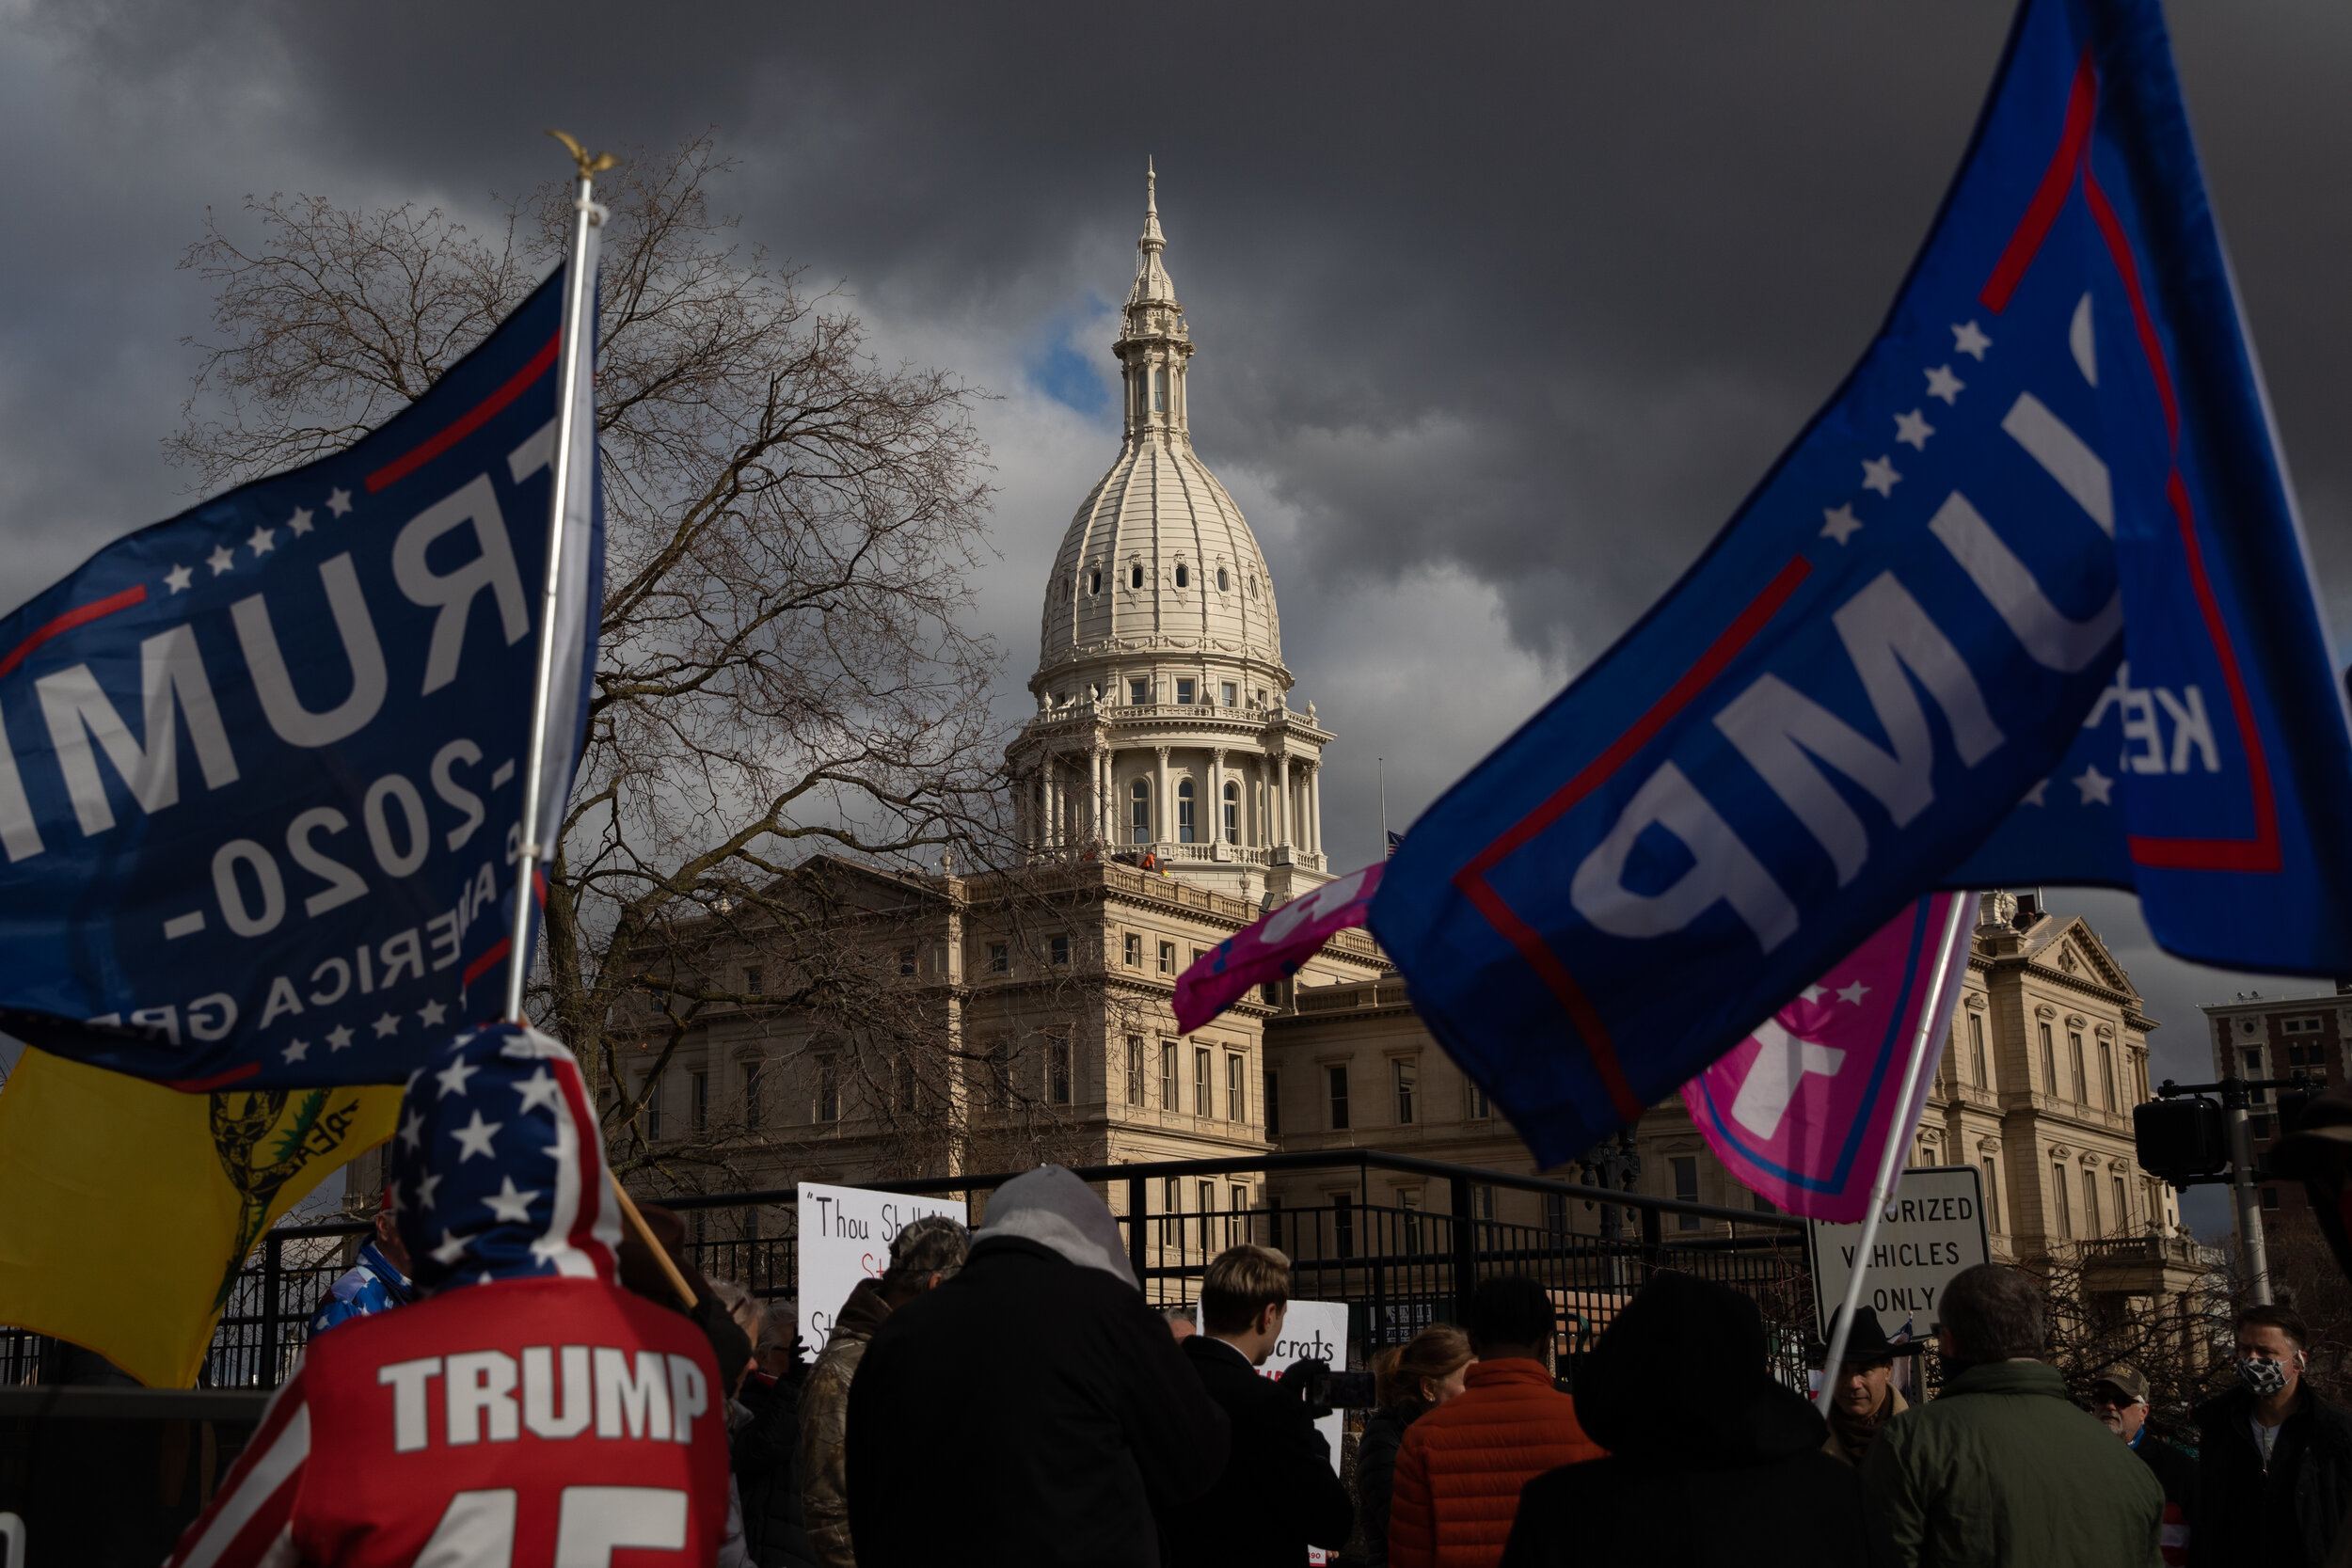  Supporters of U.S. President Donald Trump protest Michigan election results in Lansing, Michigan, U.S., on Monday Nov. 23, 2020. (Emily Elconin for The New York Times) 